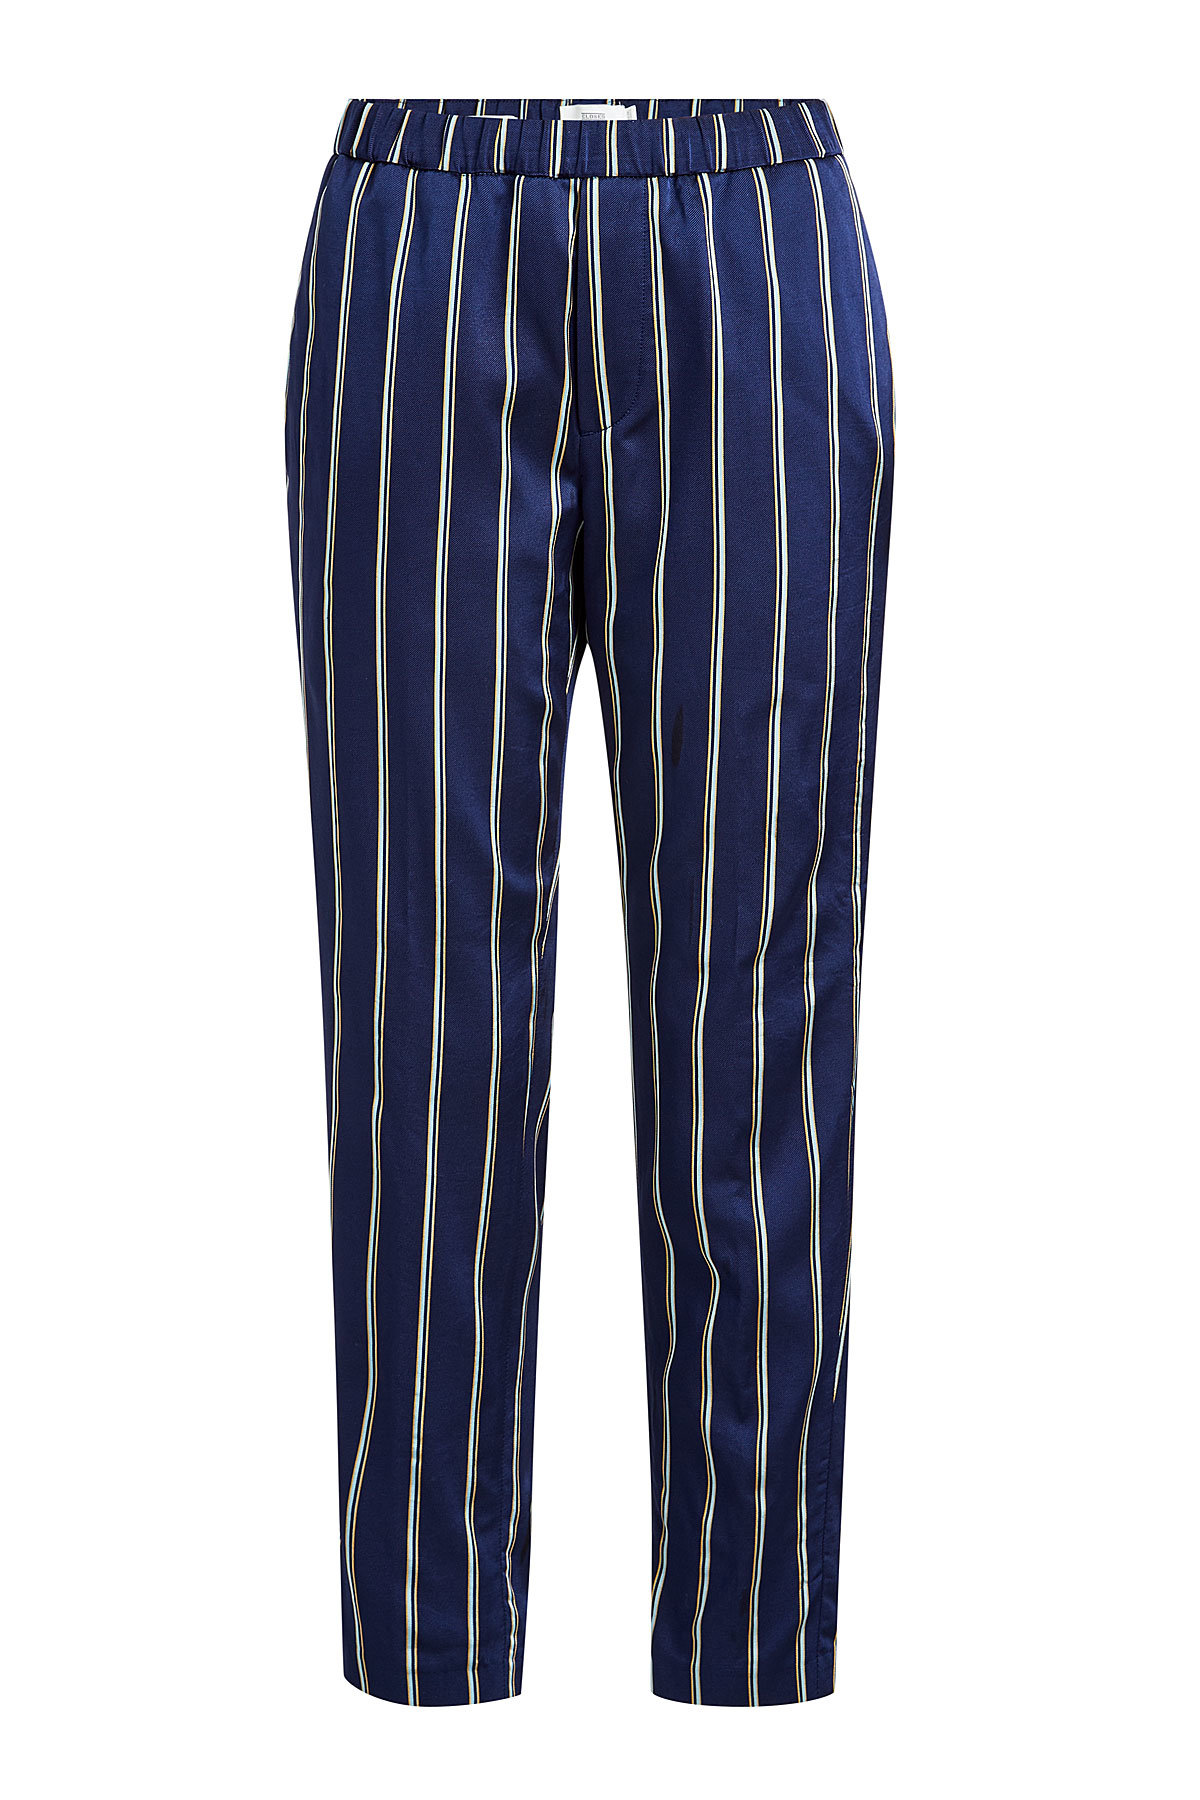 Striped Pants with Cotton by Closed